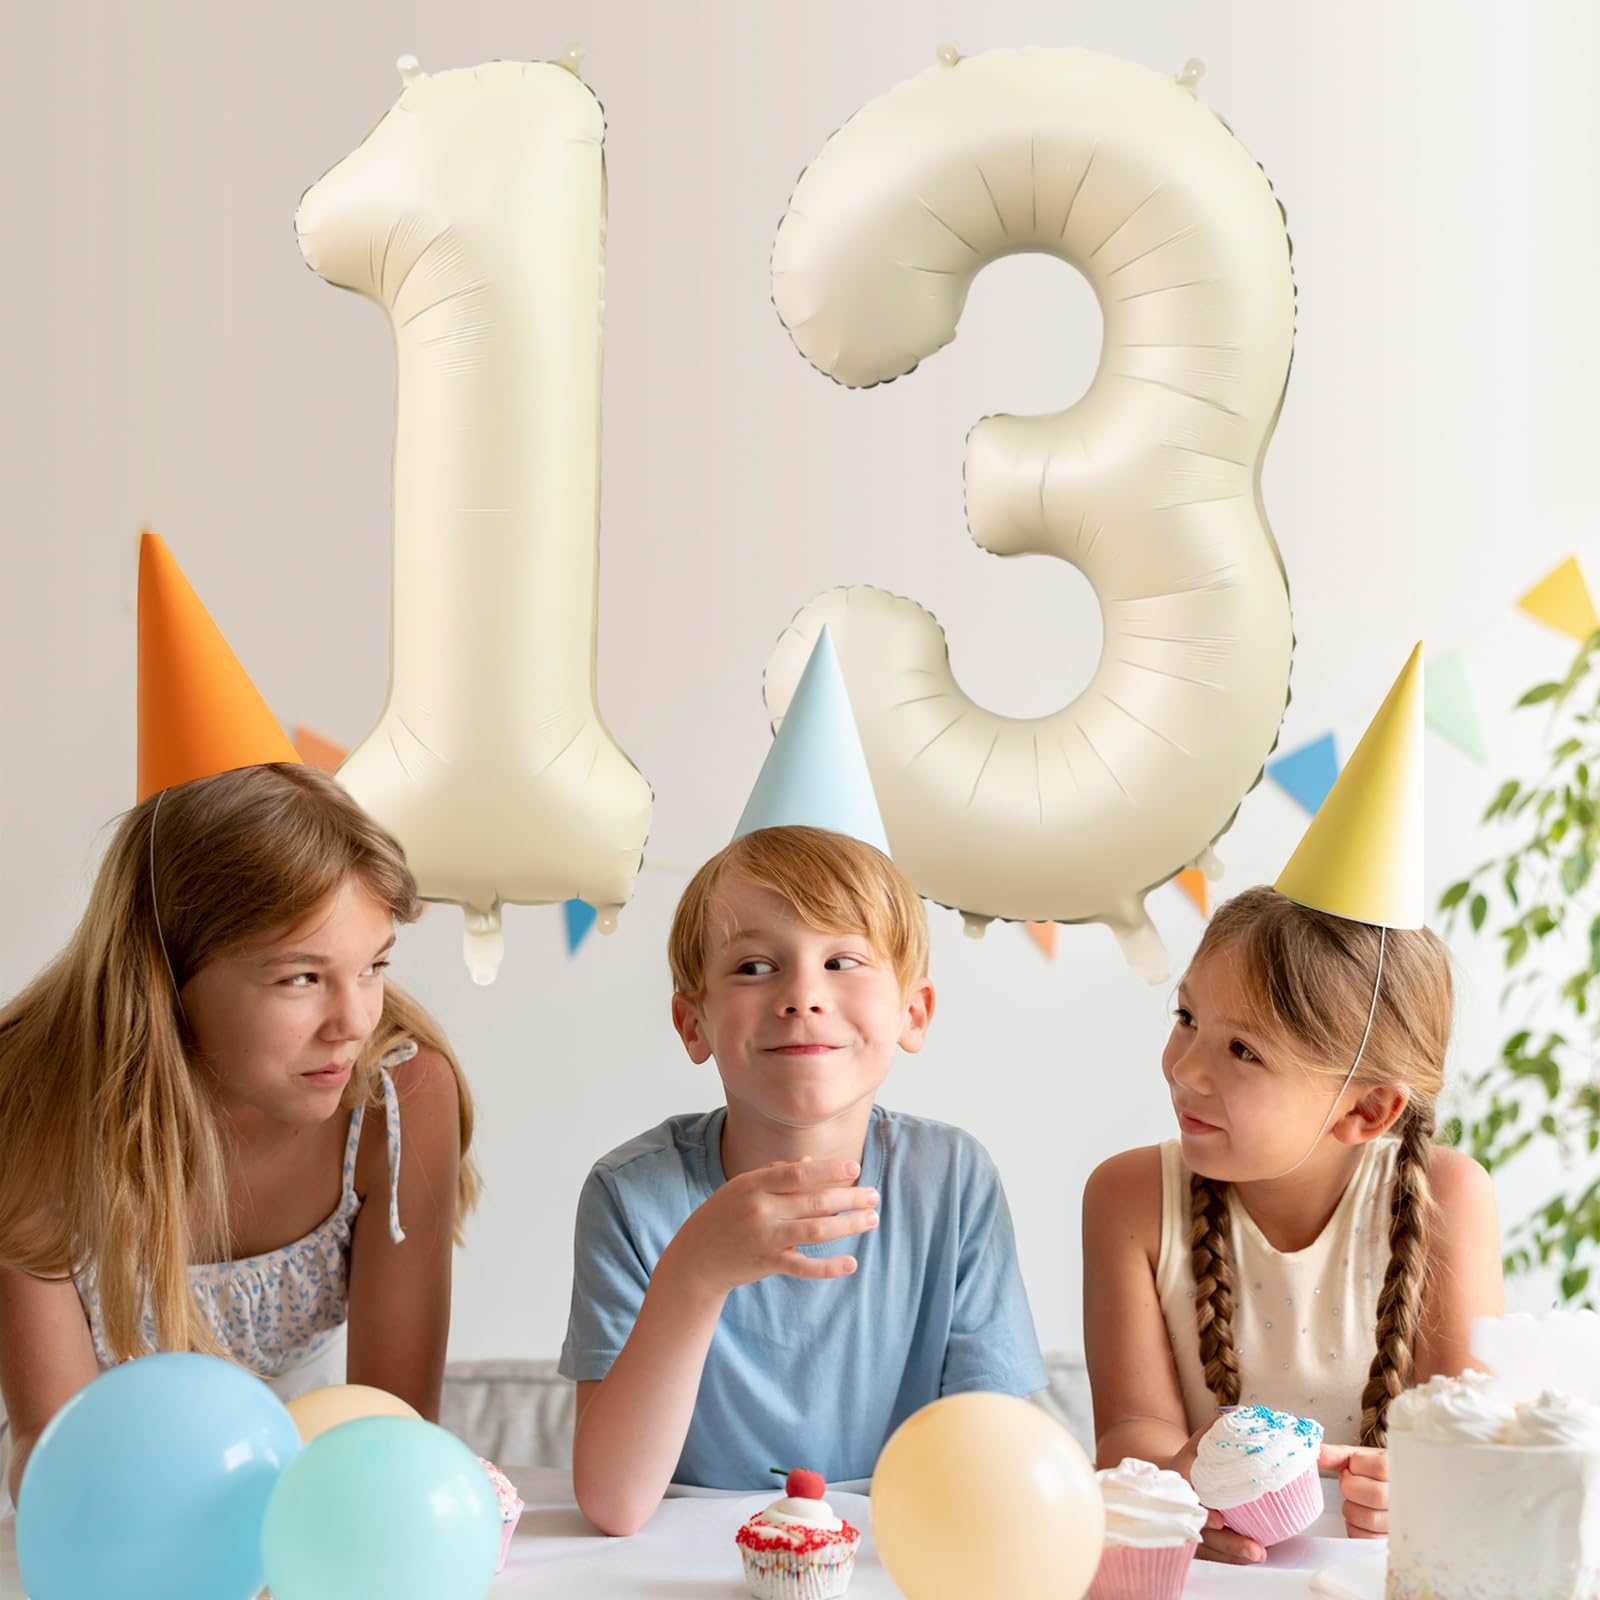 Number 13 Balloon Beige,40 Inch Large Cream Foil 13th Birthday Balloons,Digital 13 Helium Mylar Balloons for Boys Girls 13th Birthday Anniversary Party Supplies Decorations